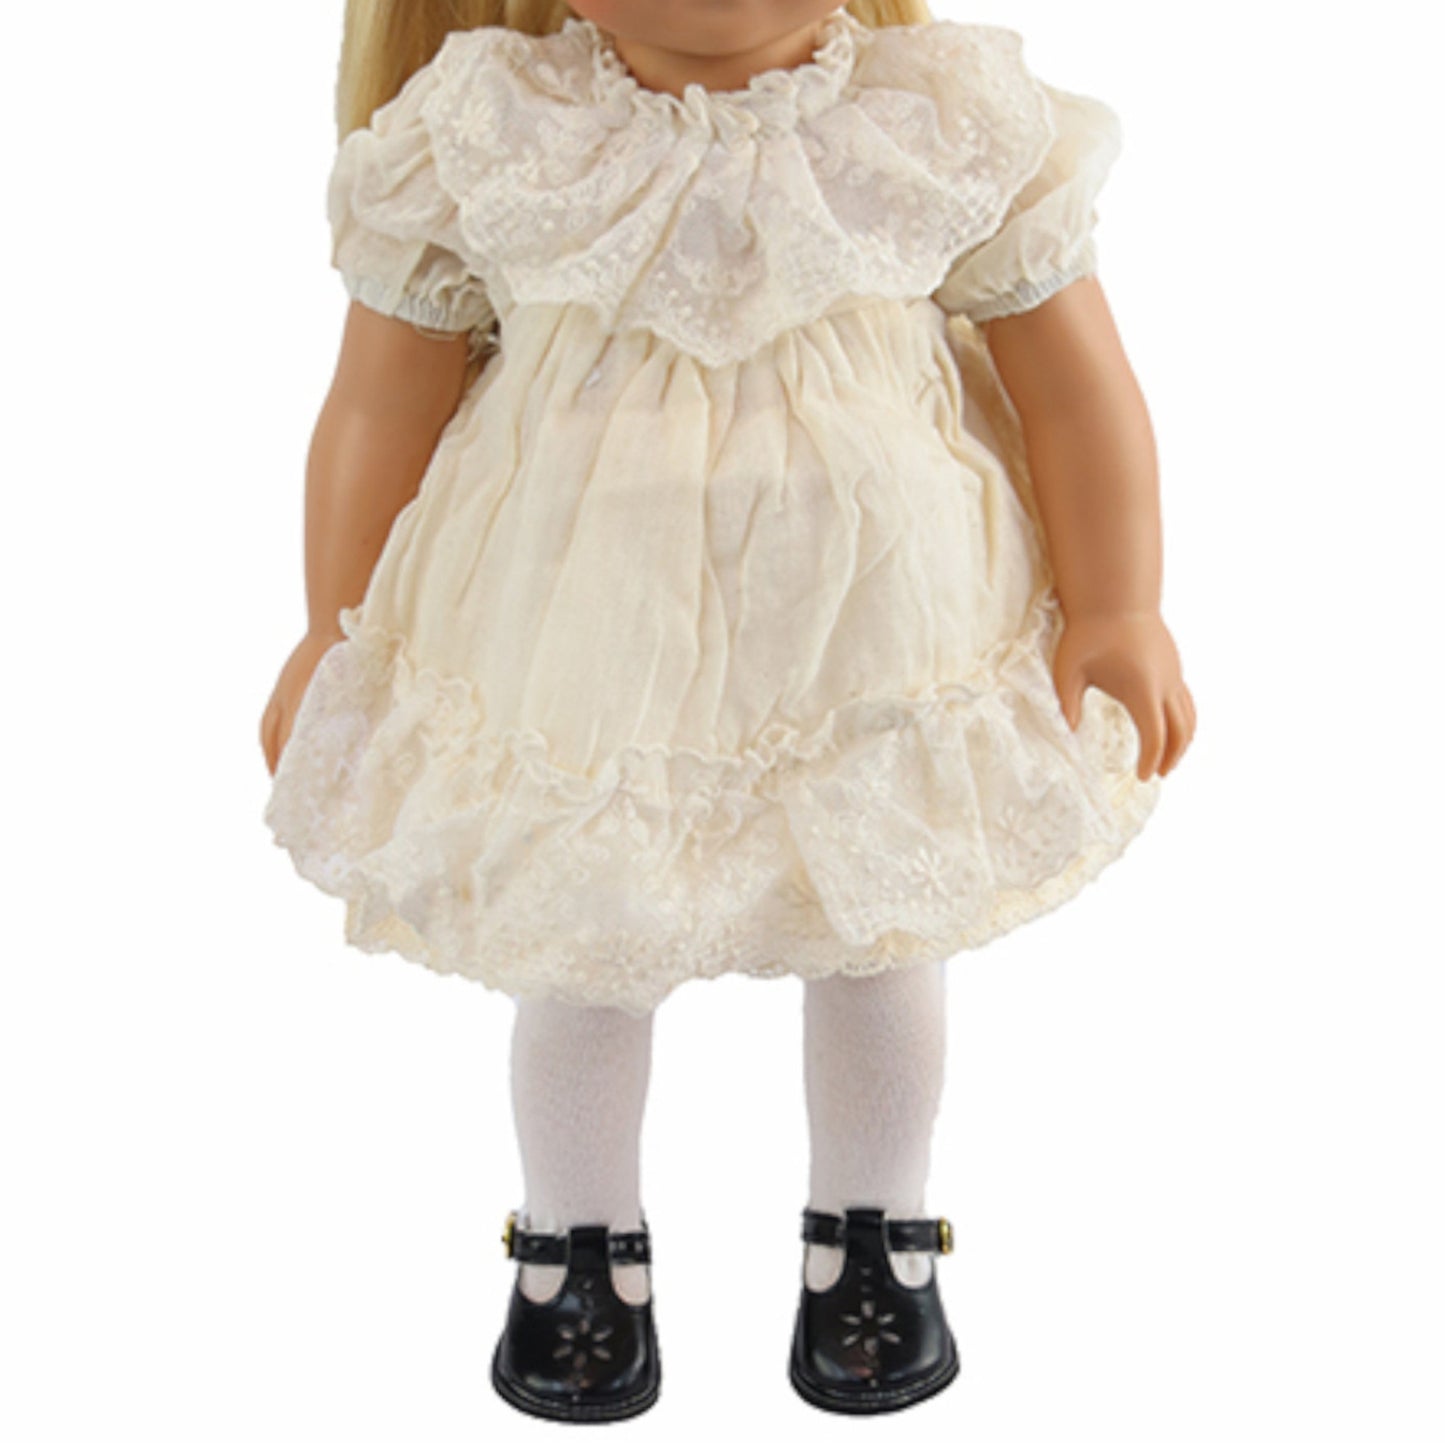 Cream Lace Dress with Headband for 18-inch dolls with doll Front